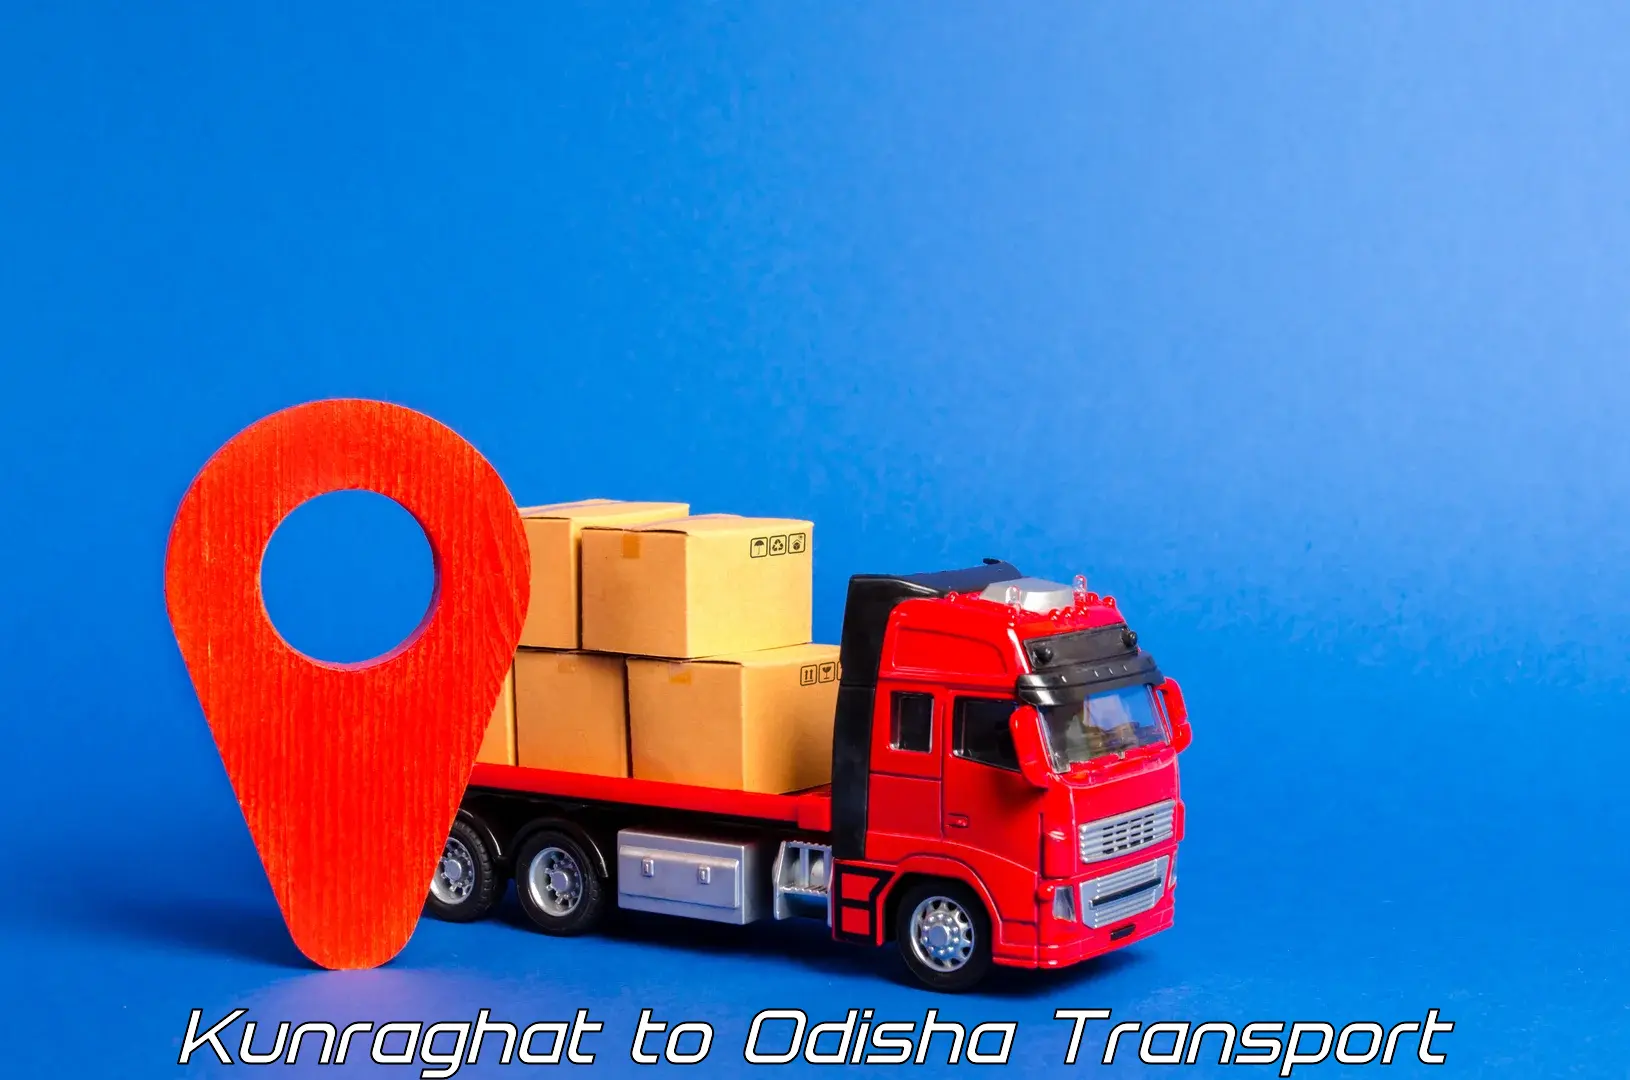 Container transport service Kunraghat to Jharsuguda